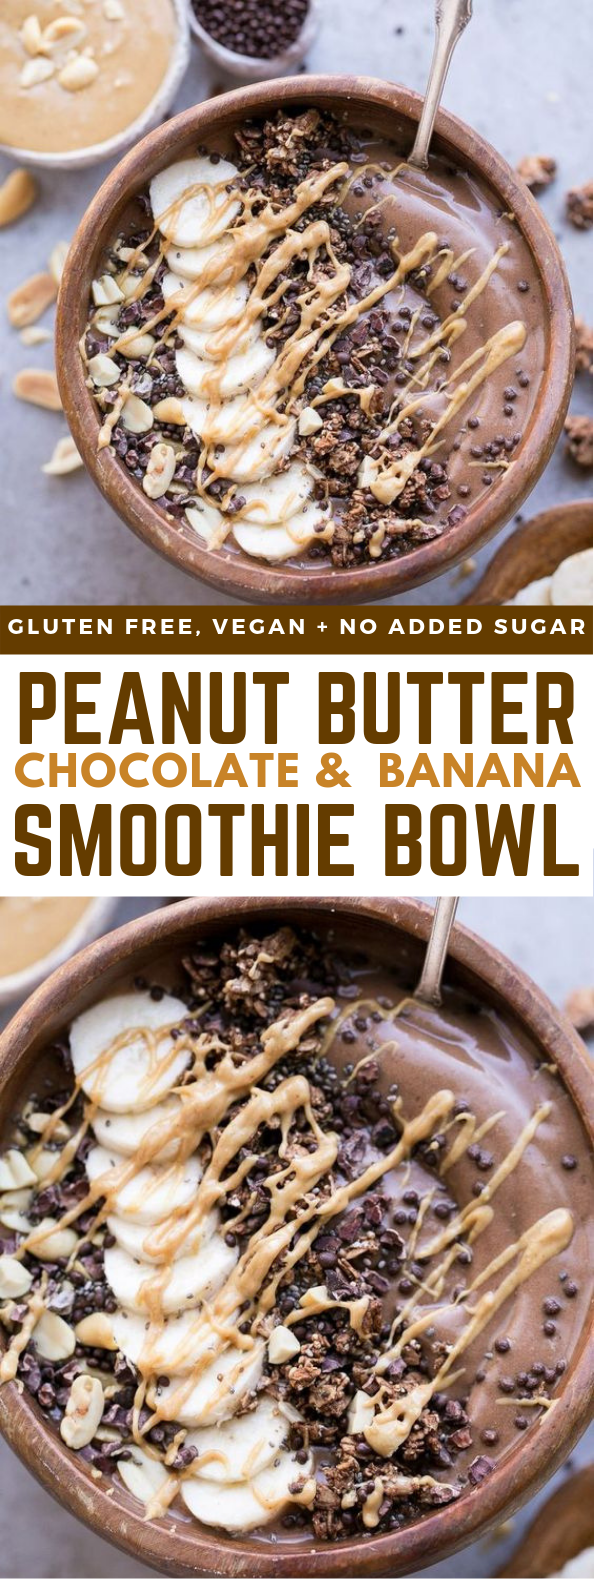 CHOCOLATE PEANUT BUTTER BANANA SMOOTHIE BOWL